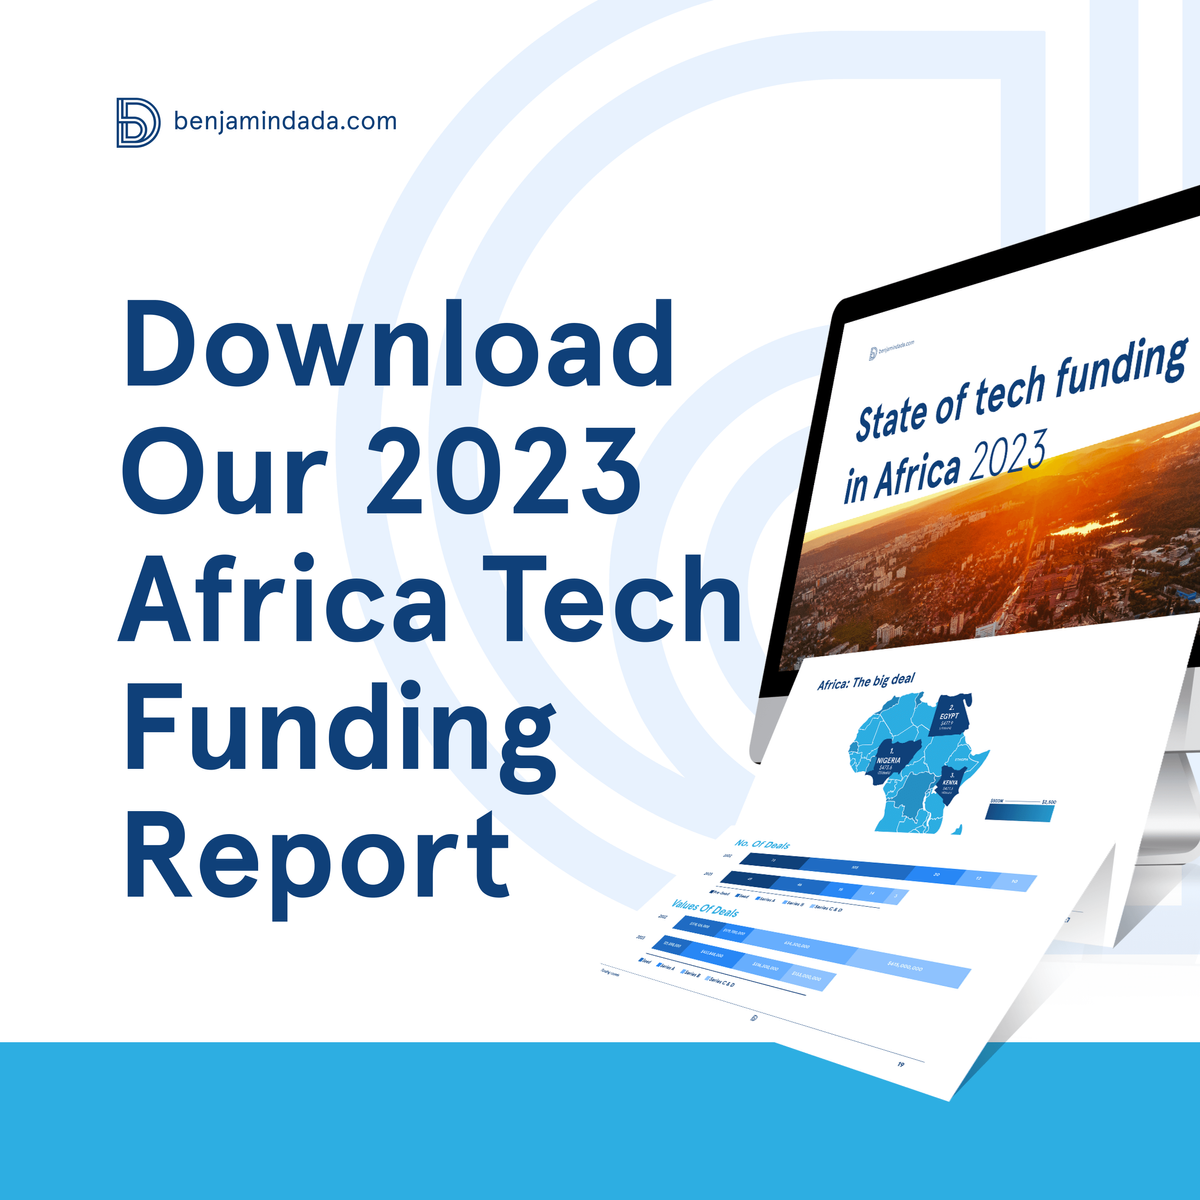 An image of the 2023 State of Startup VC Funding in Africa Report by Benjamin Dada